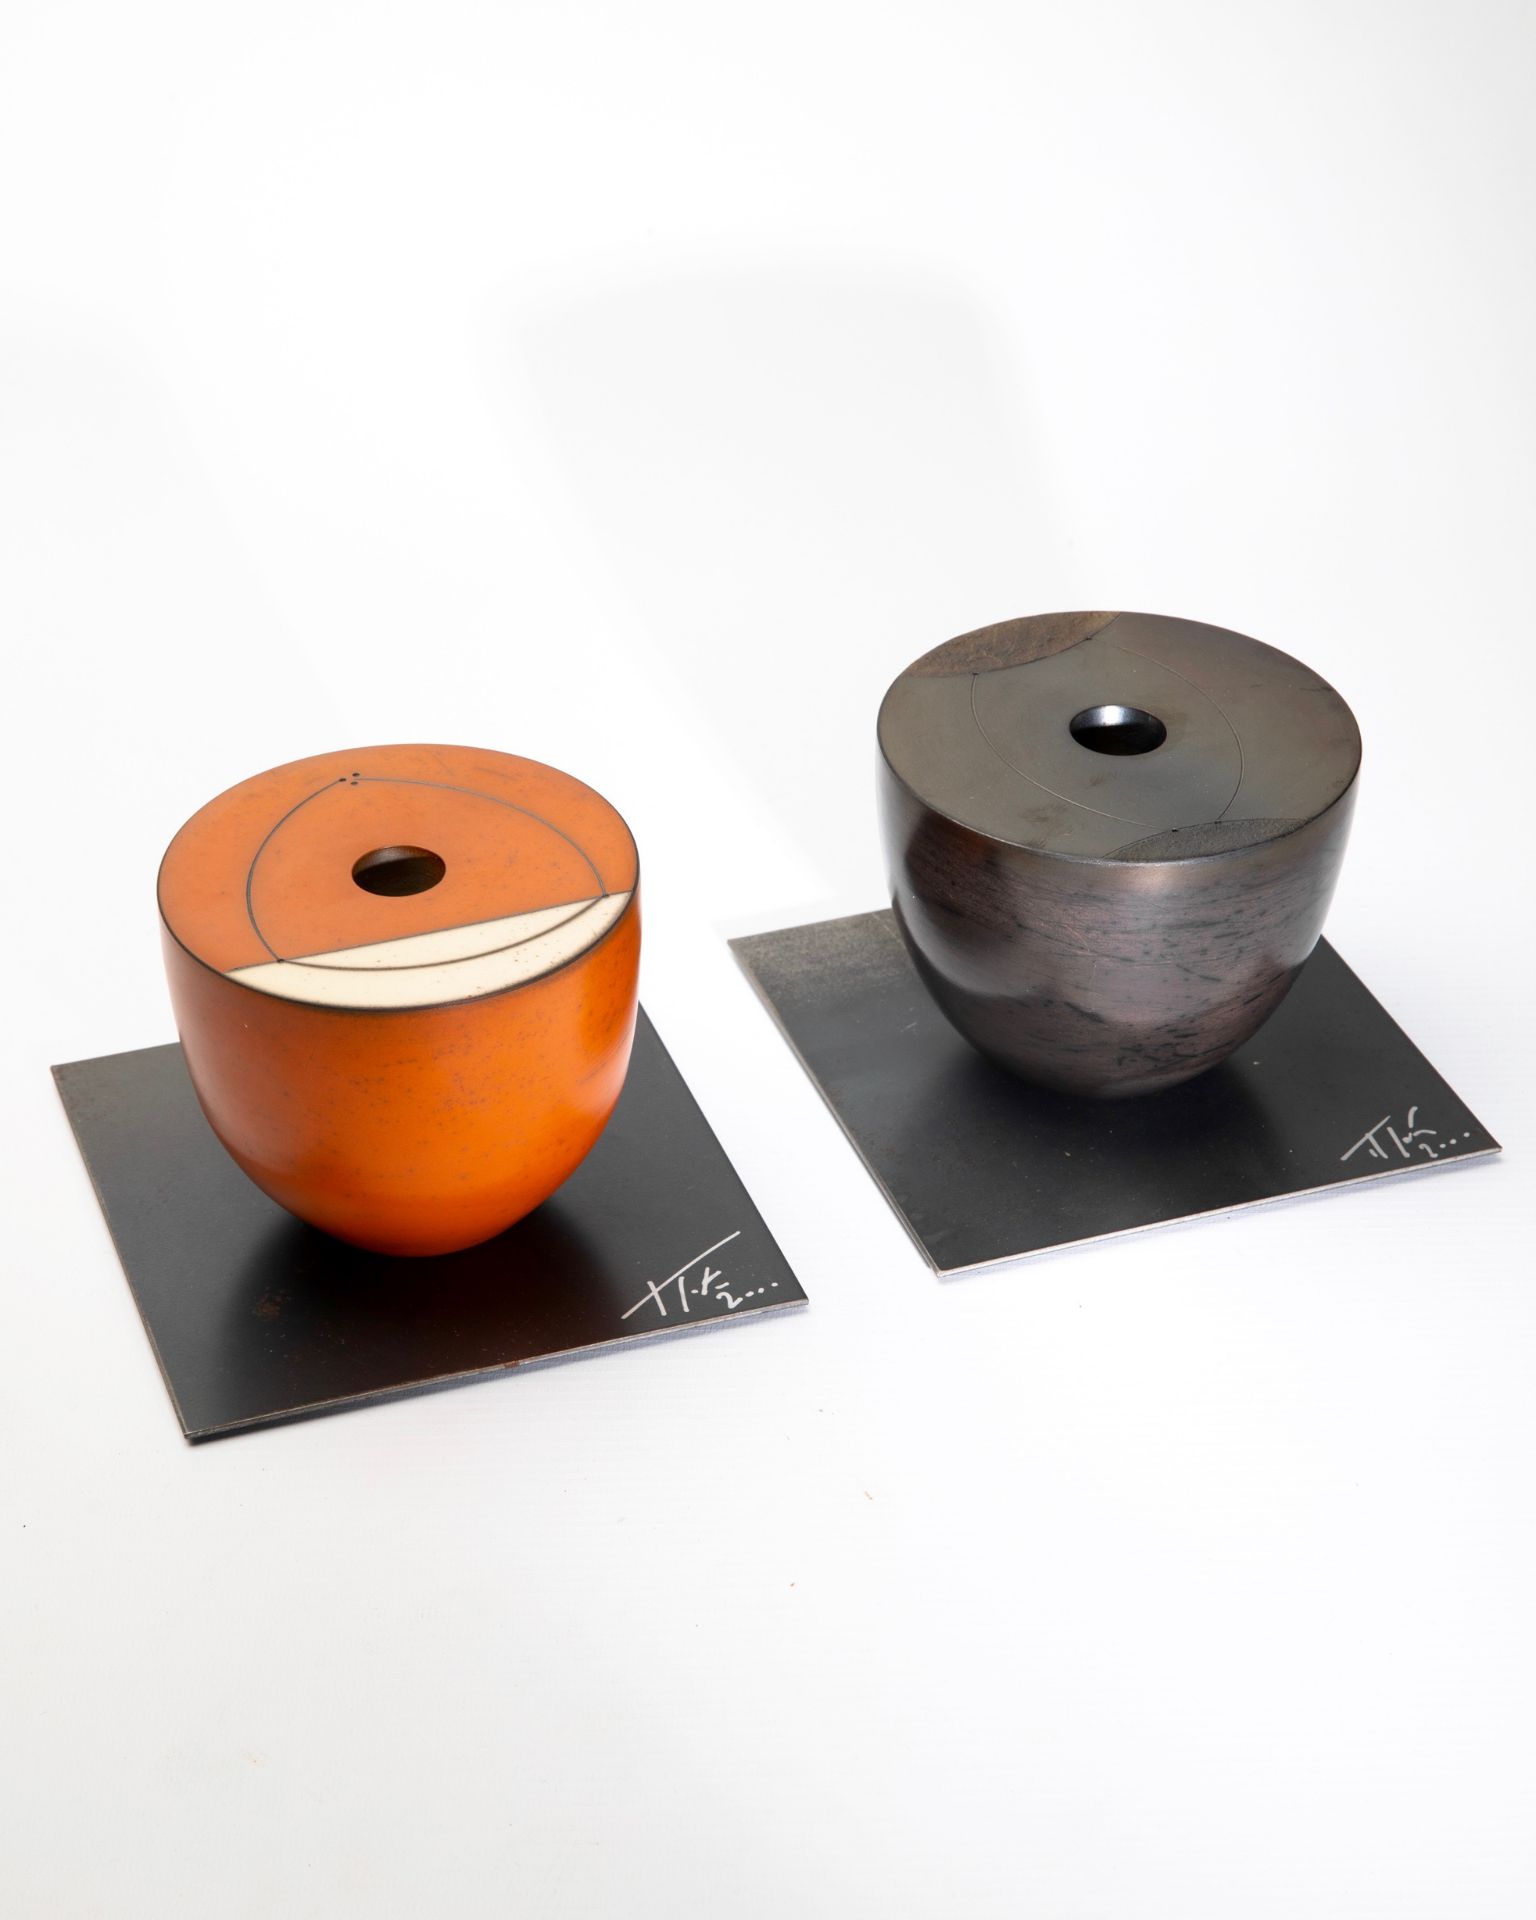 Tjok (Jacques) Dessauvages, 2 sculptural objects on a metal base